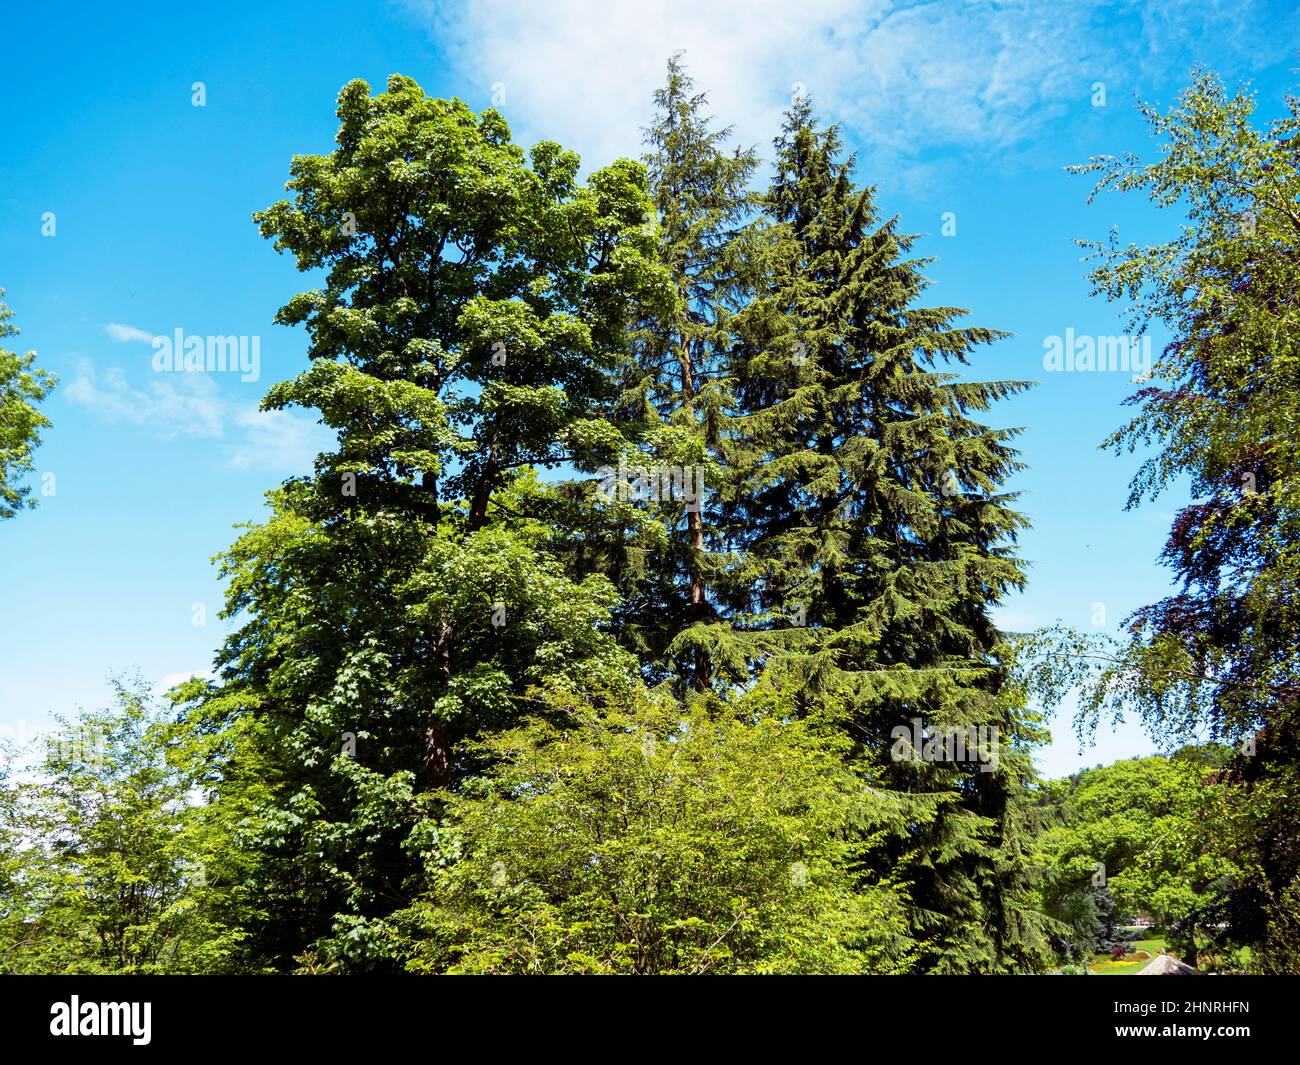 Trees in a garden with green foliage and a blue sky background Stock Photo